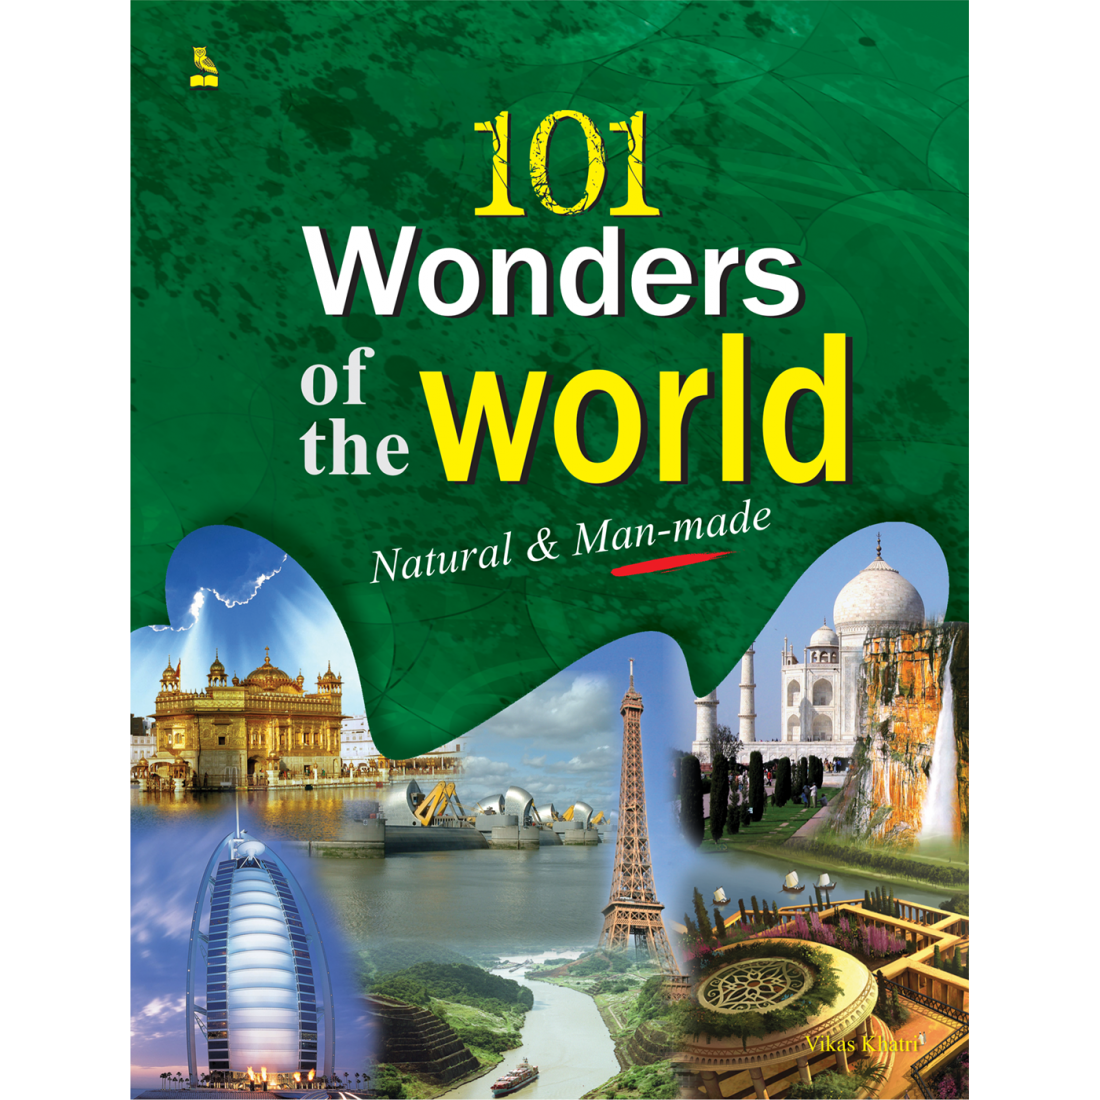 The world is book. Книга Wonders of the World. World book. Wonder World book. Wonders of the World book Cover\.